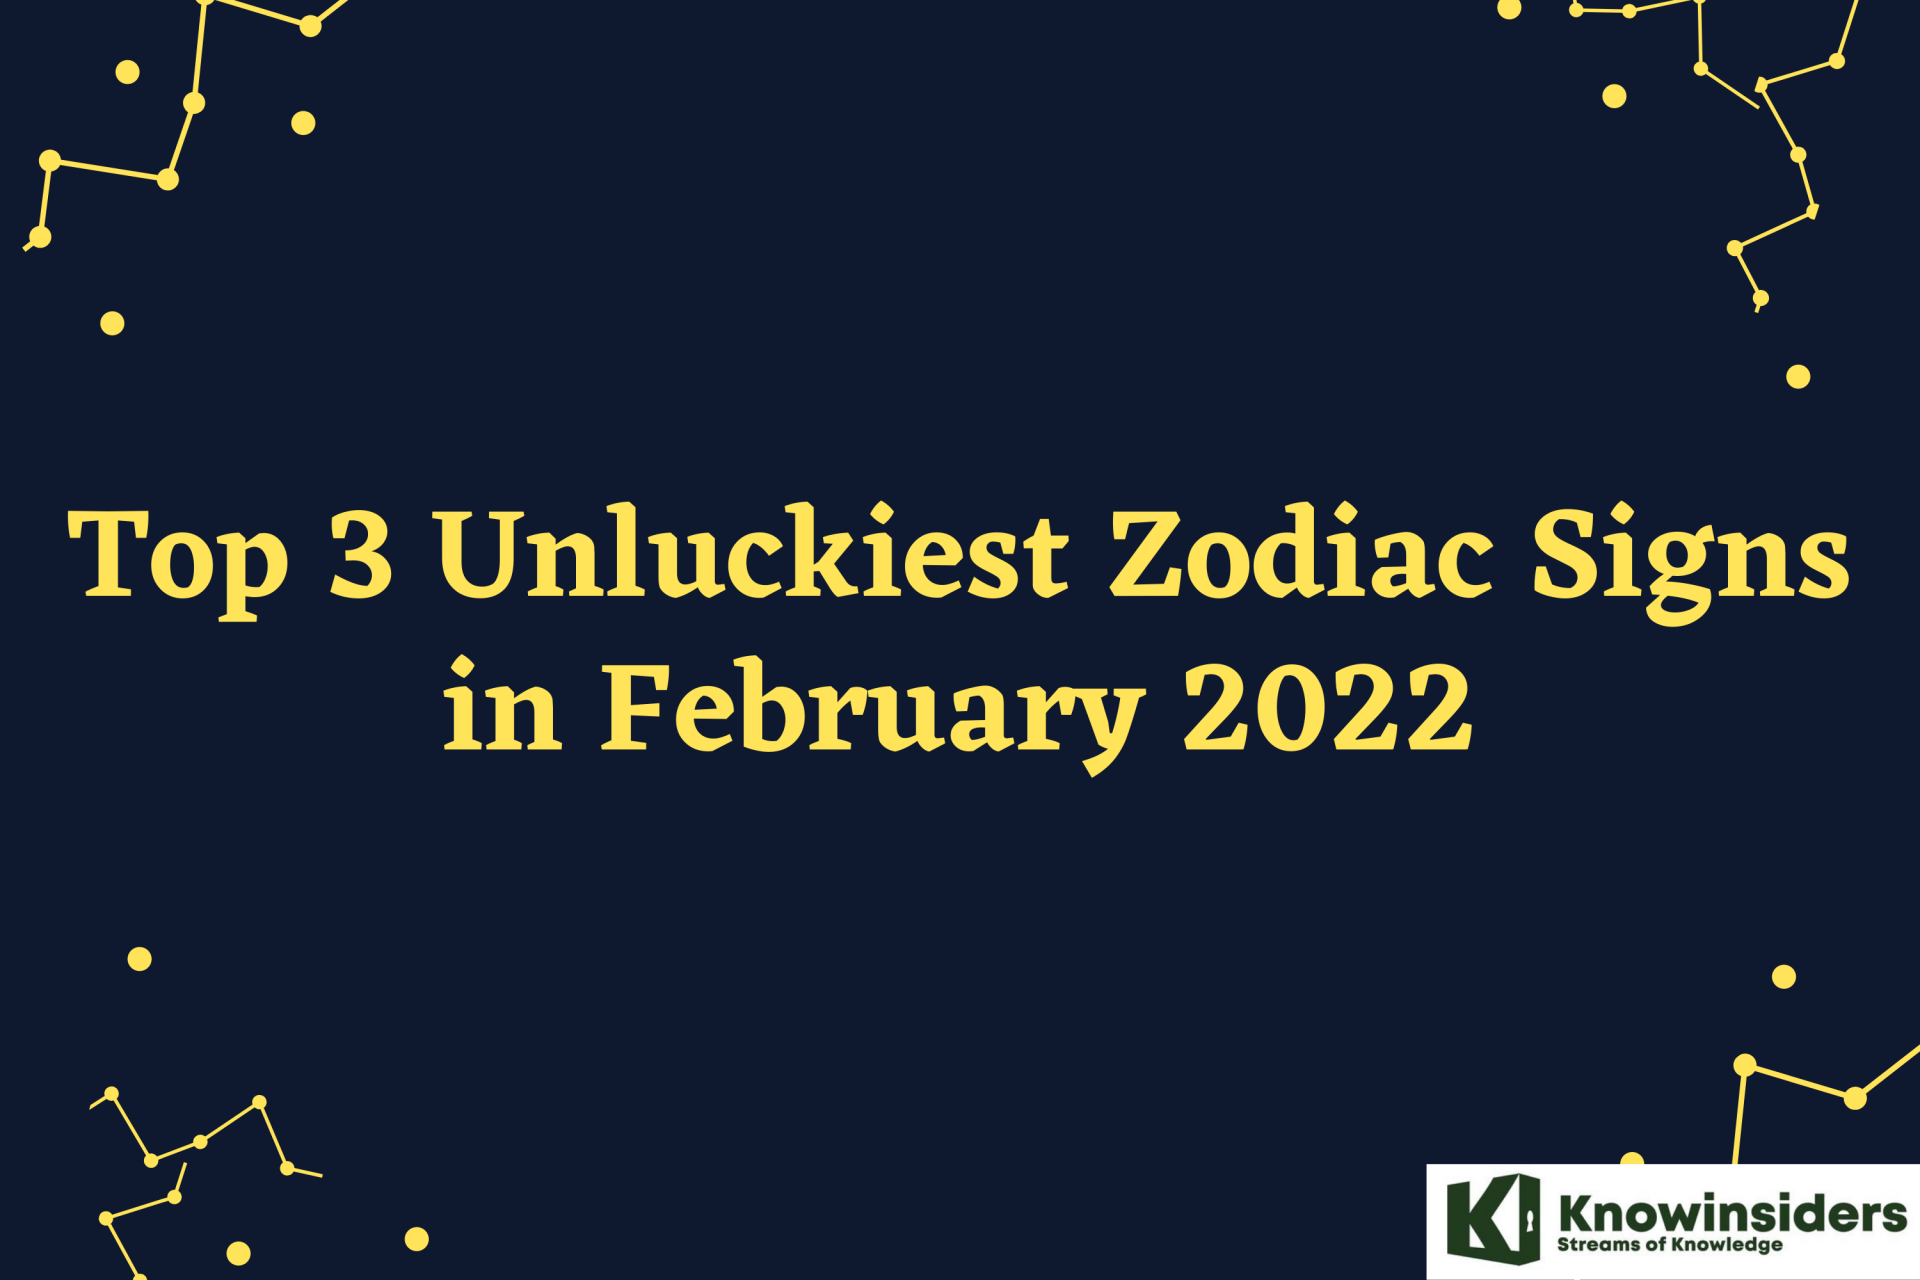 Top 3 Unluckiest Zodiac Signs in February 2022 and How To Improve The Luck